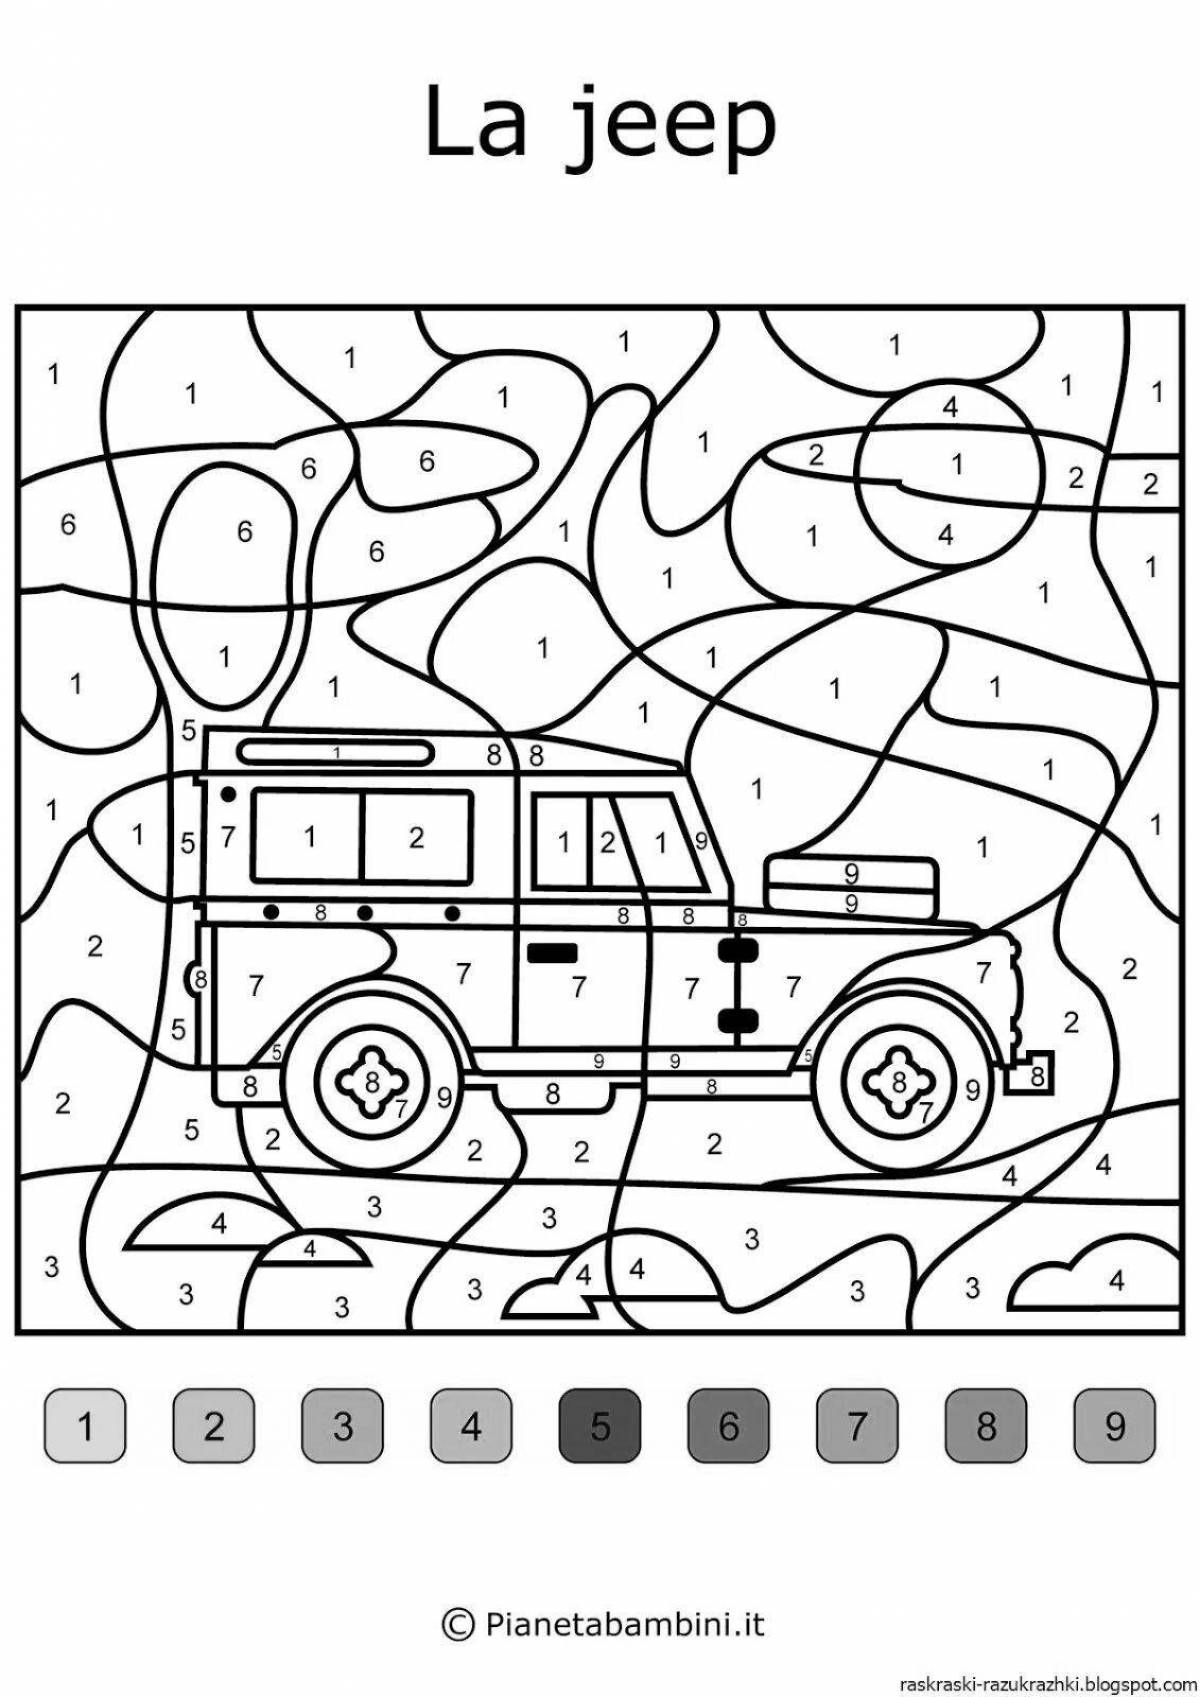 Colourful coloring by numbers for children 7-8 years old